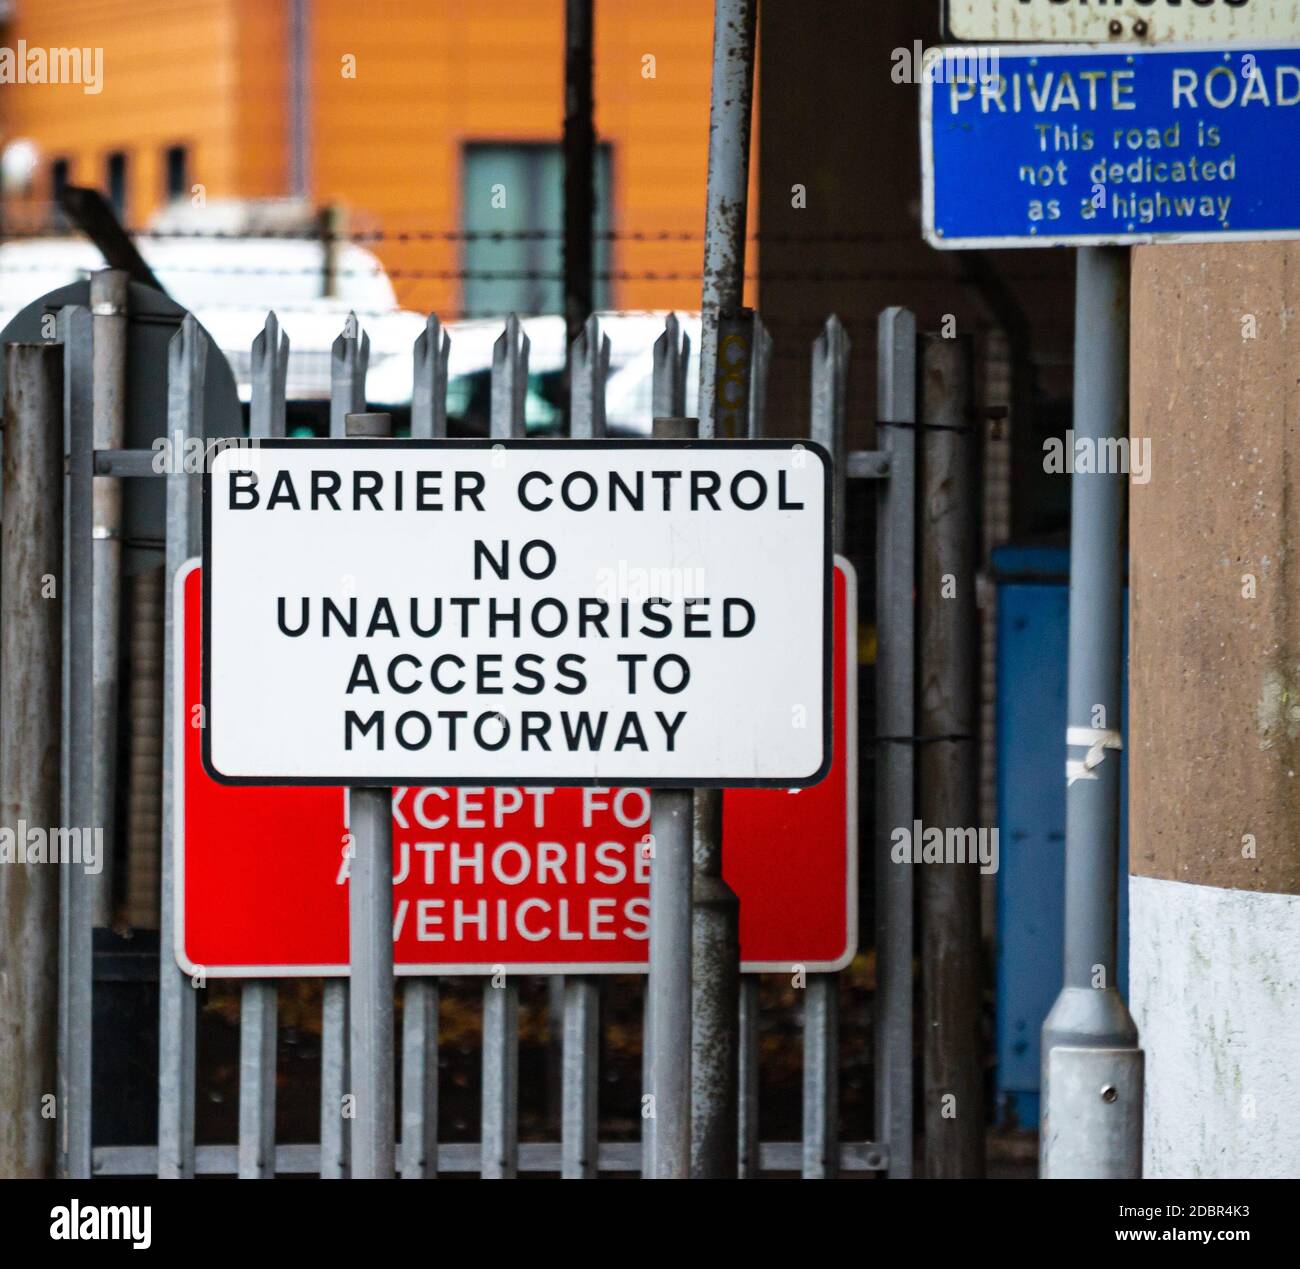 Barrier Control No Unauthorised Access To Motorway Stock Photo